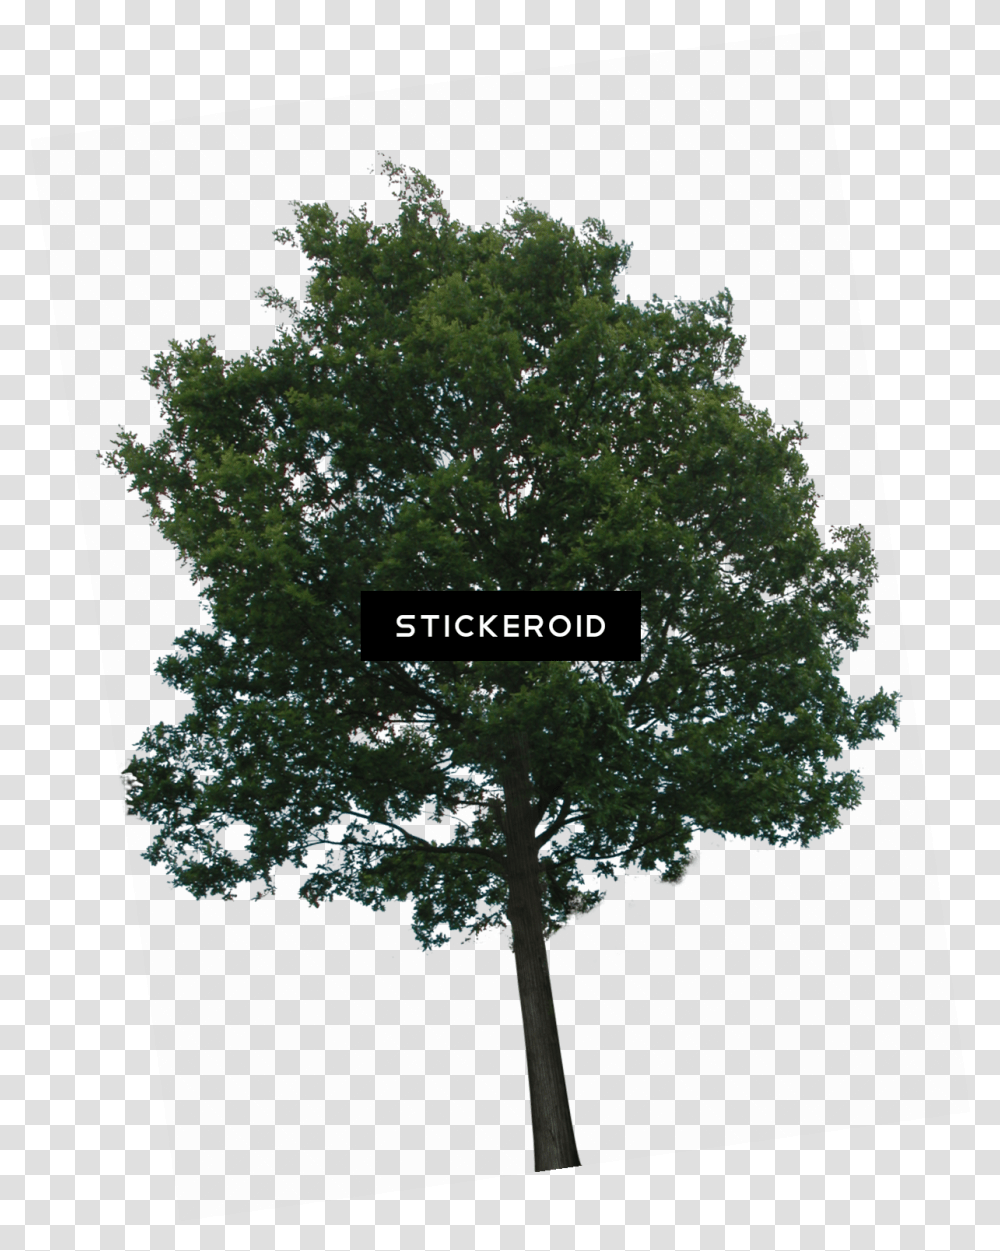 Download Hd Tree Tree Transparency, Plant, Oak, Sycamore, Cross Transparent Png